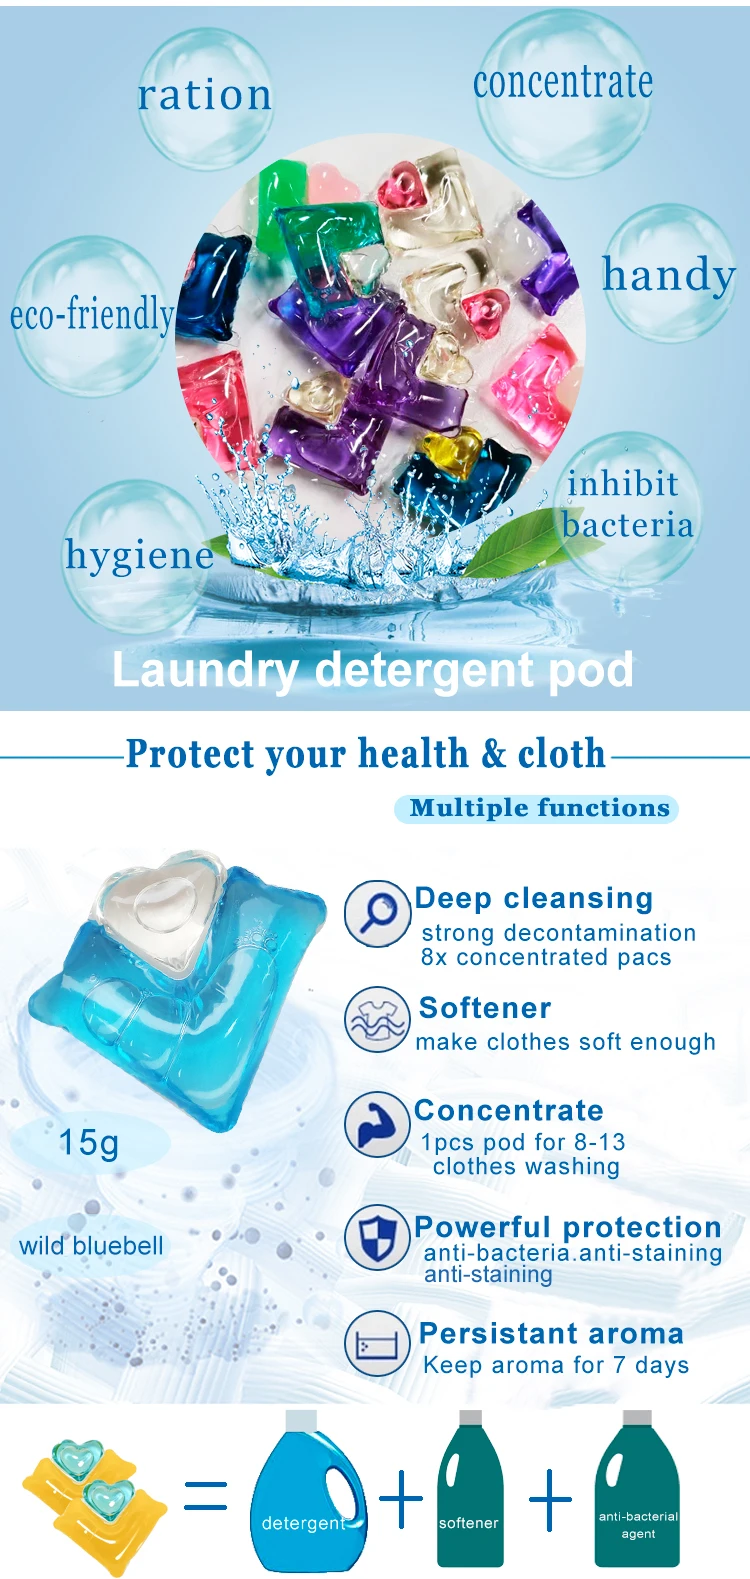 Netflix Scented bottle  Highly formulated abc detergent stain laundry  soap pods  liquid